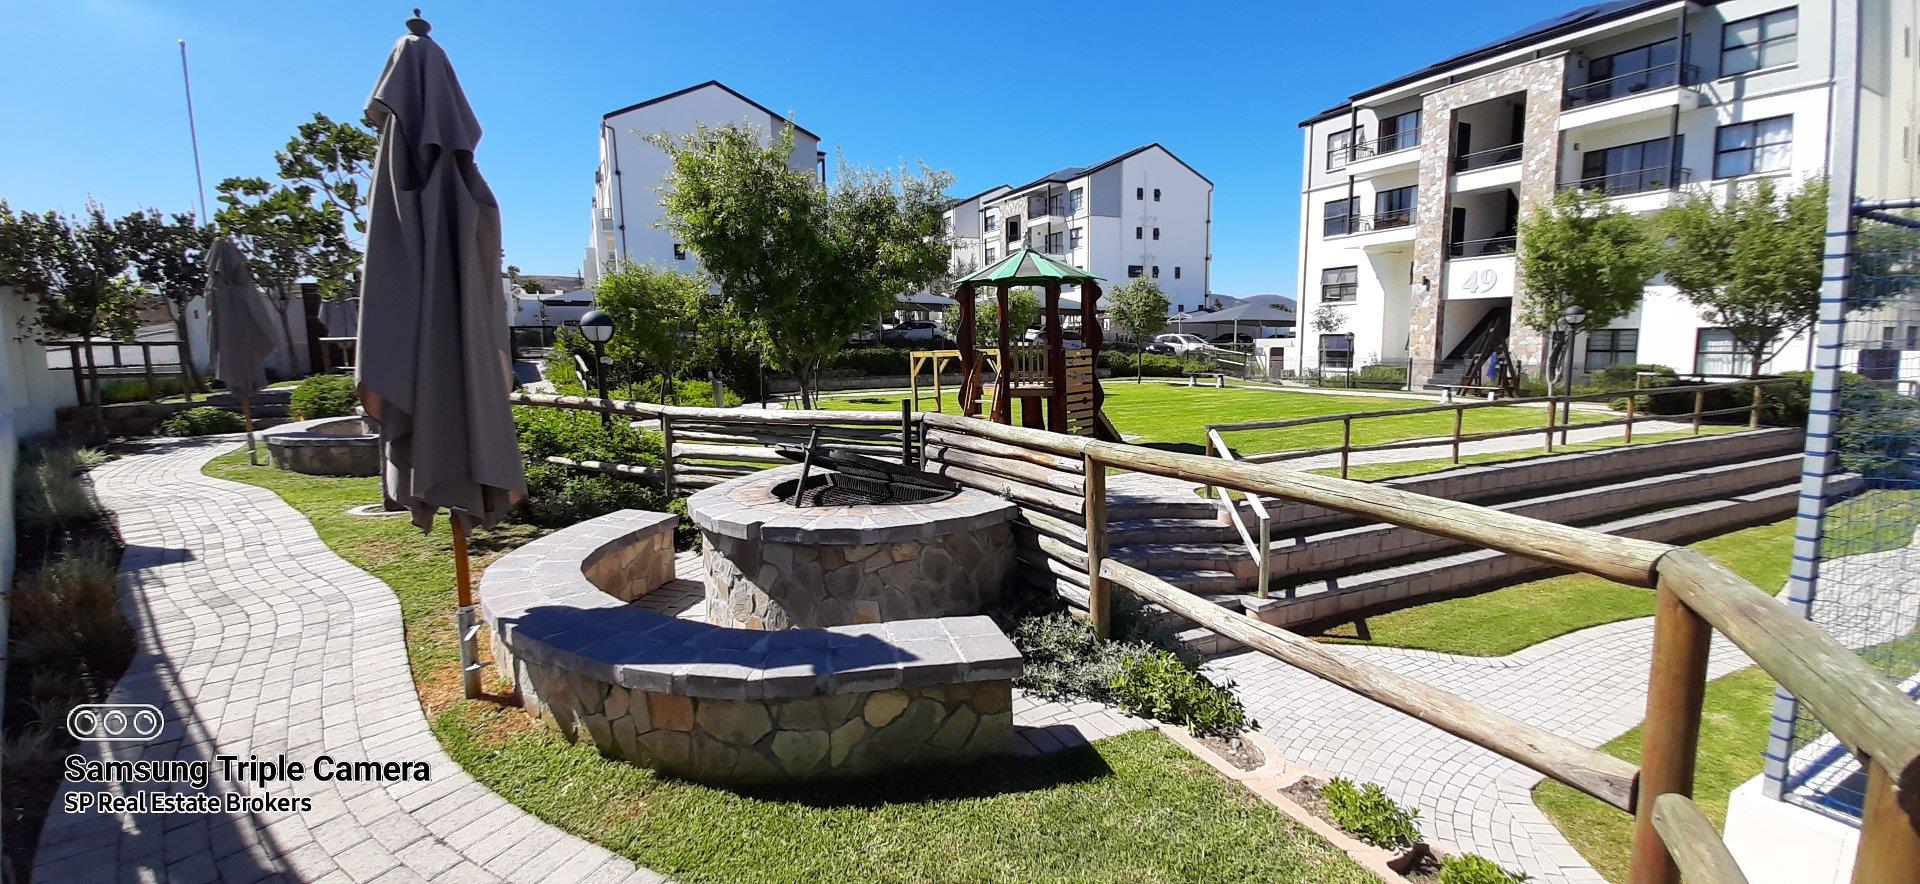 1 Bedroom Apartment for Sale - Western Cape